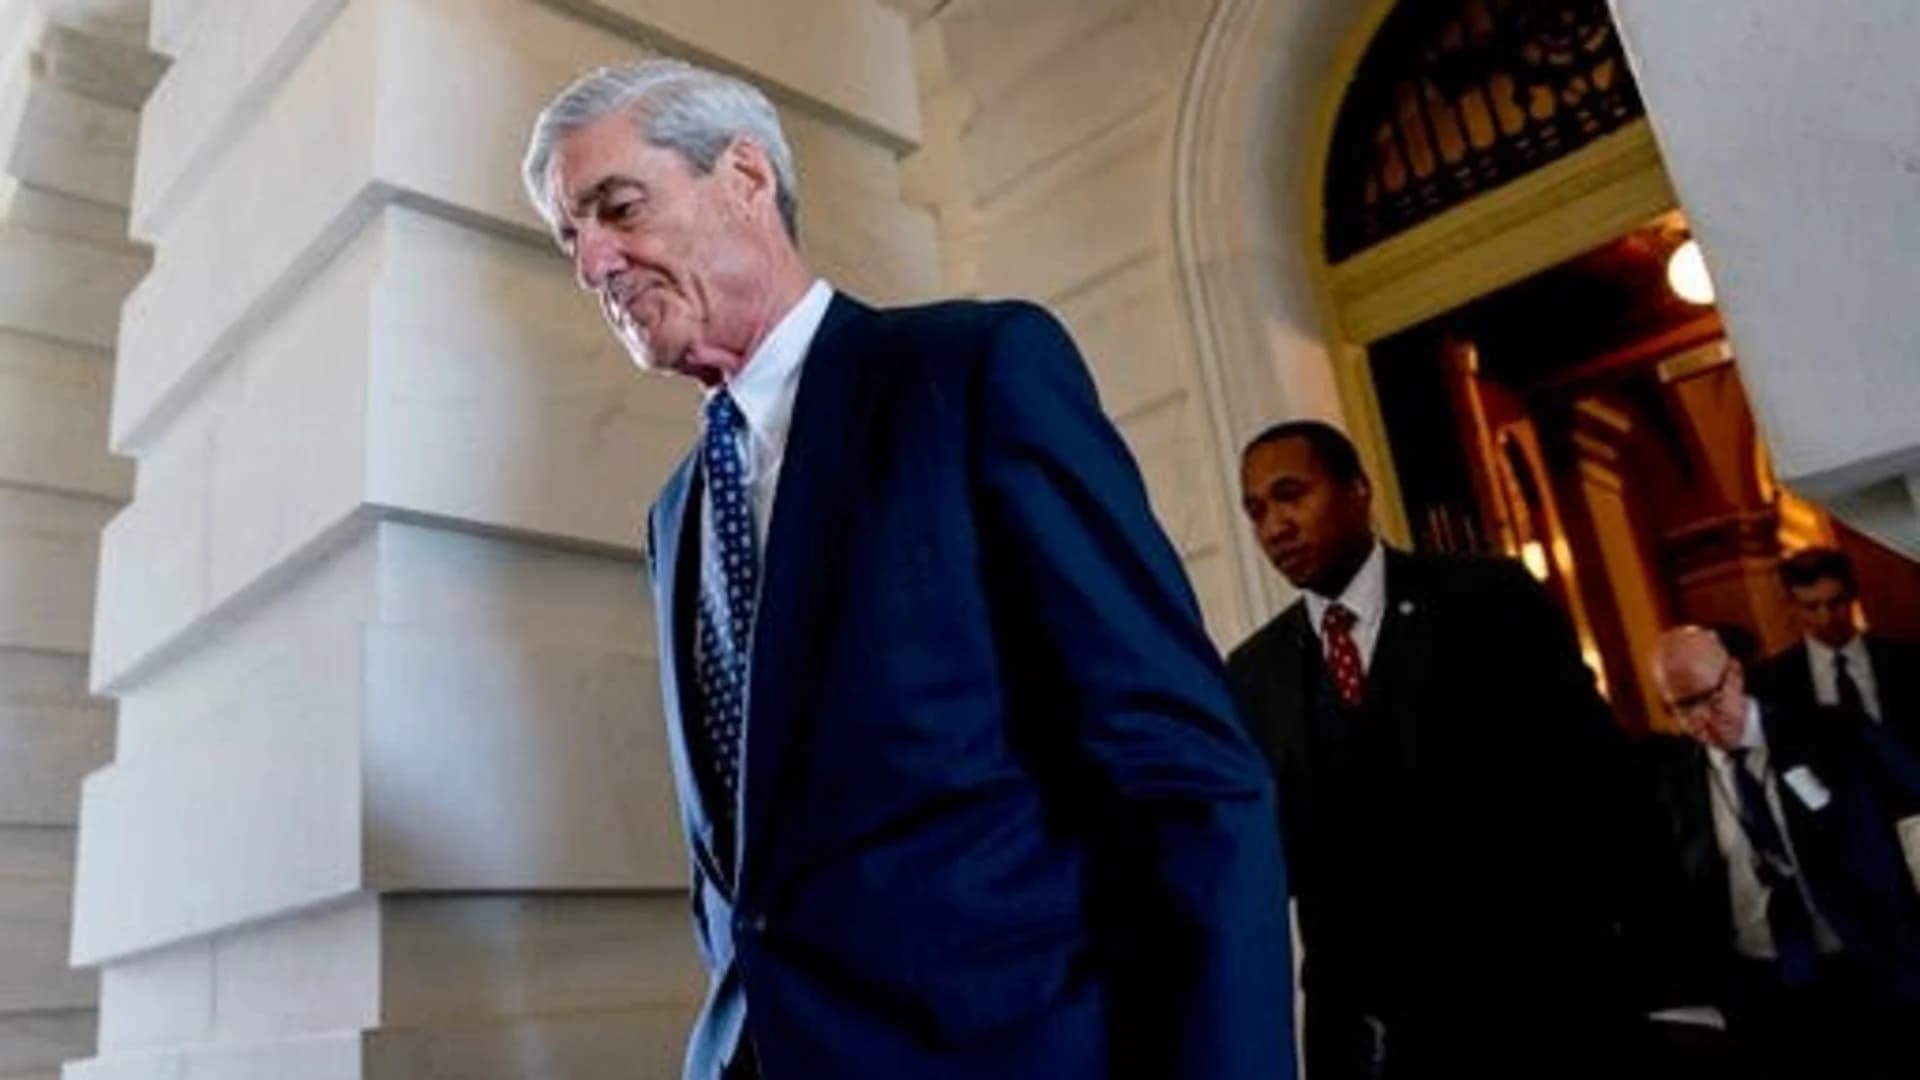 Special Council Robert Mueller makes first public comments on the Russia probe - Live video